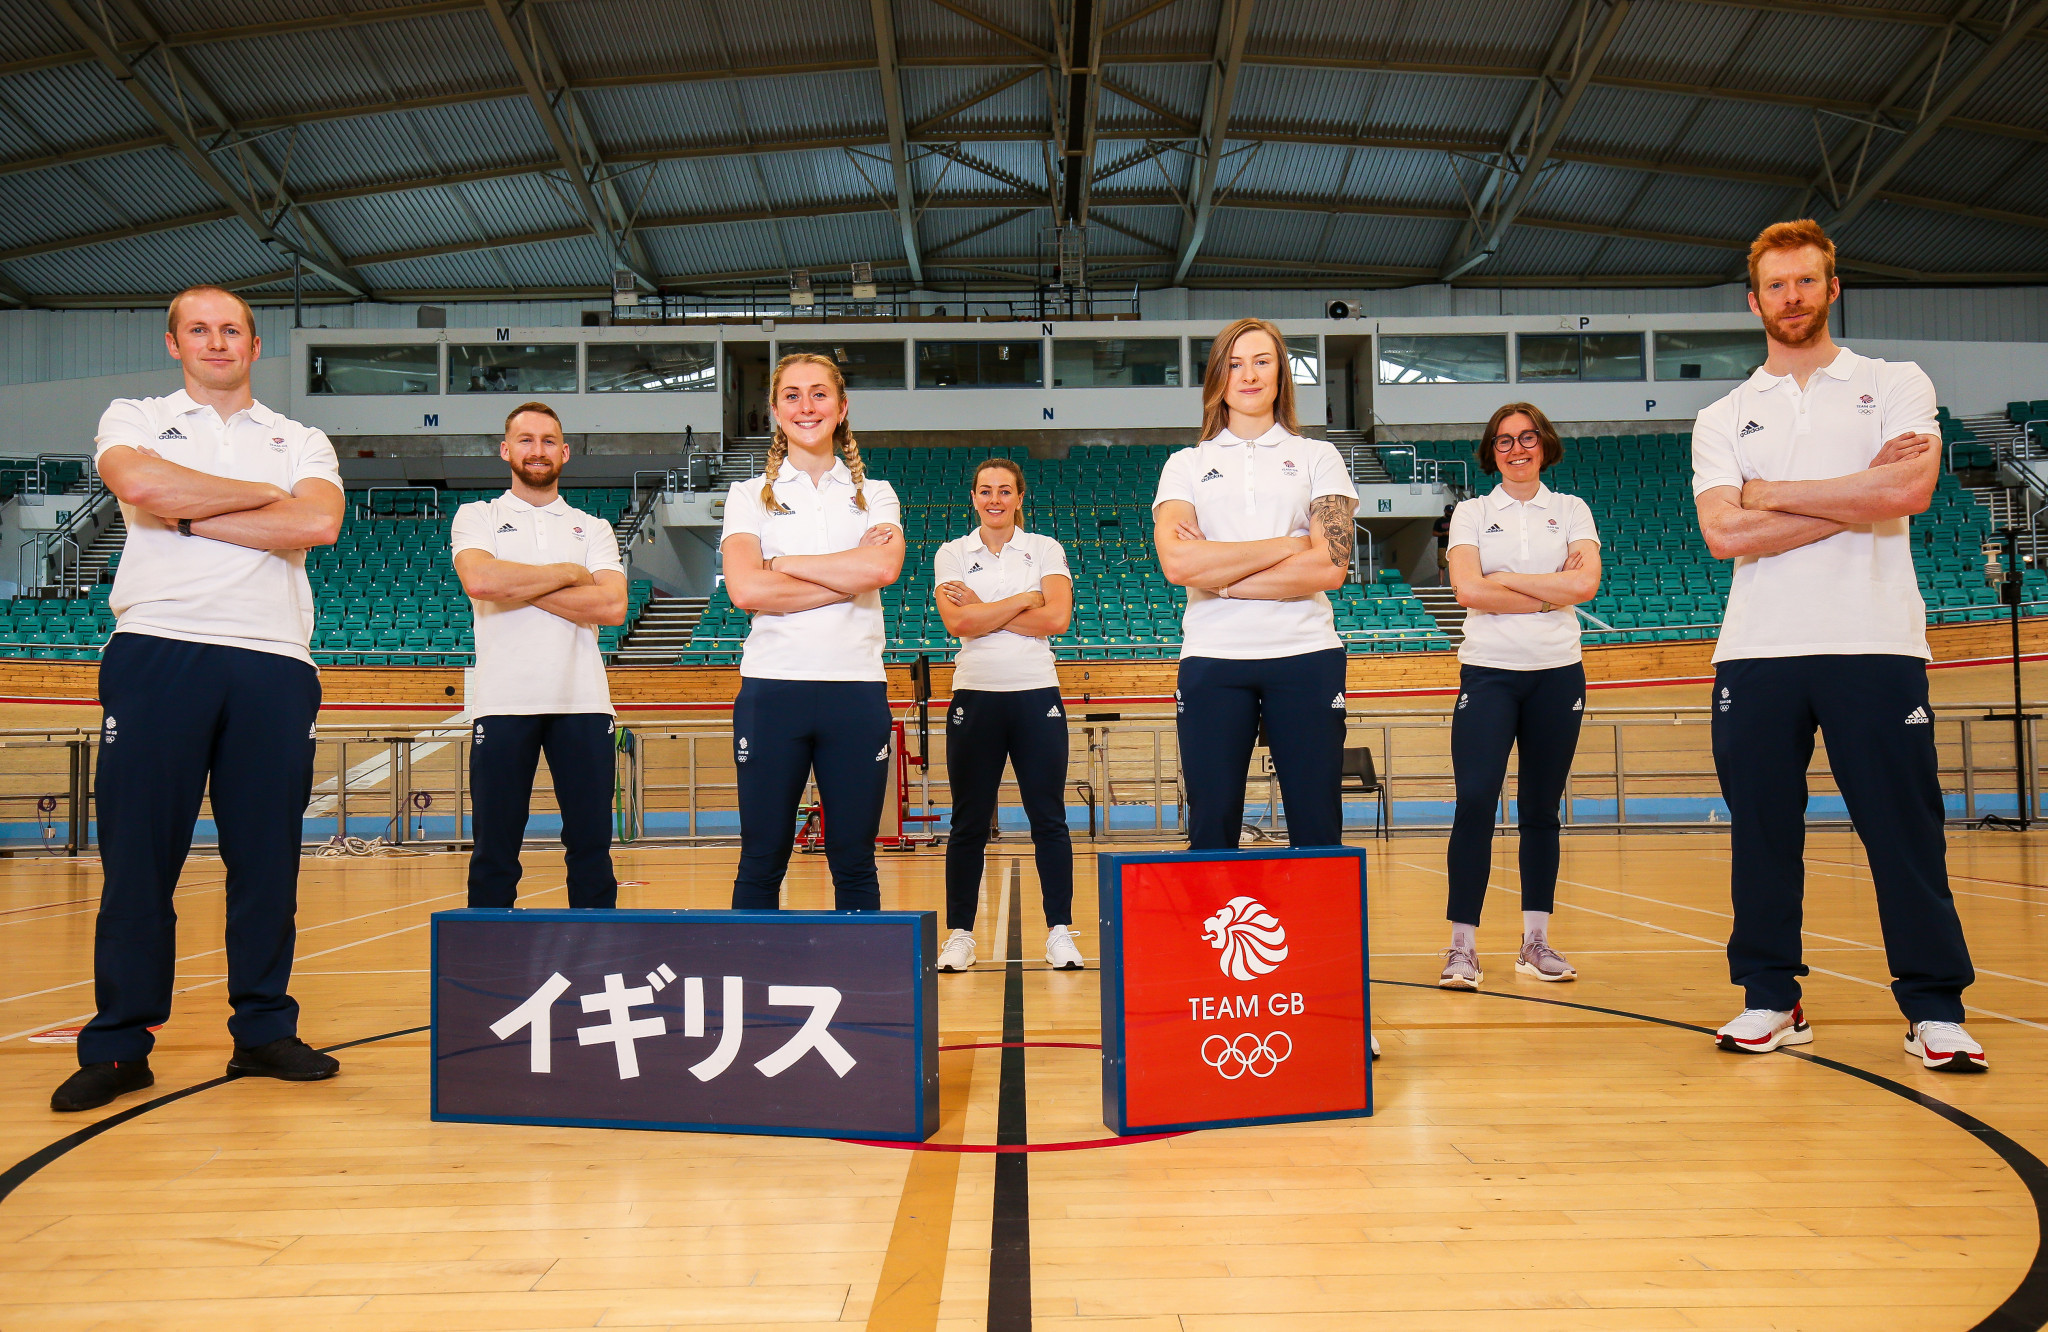 BOA chief executive Andy Anson is confident that 90 per cent of Team GB's squad for Tokyo 2020 will be fully vaccinated ©Getty Images